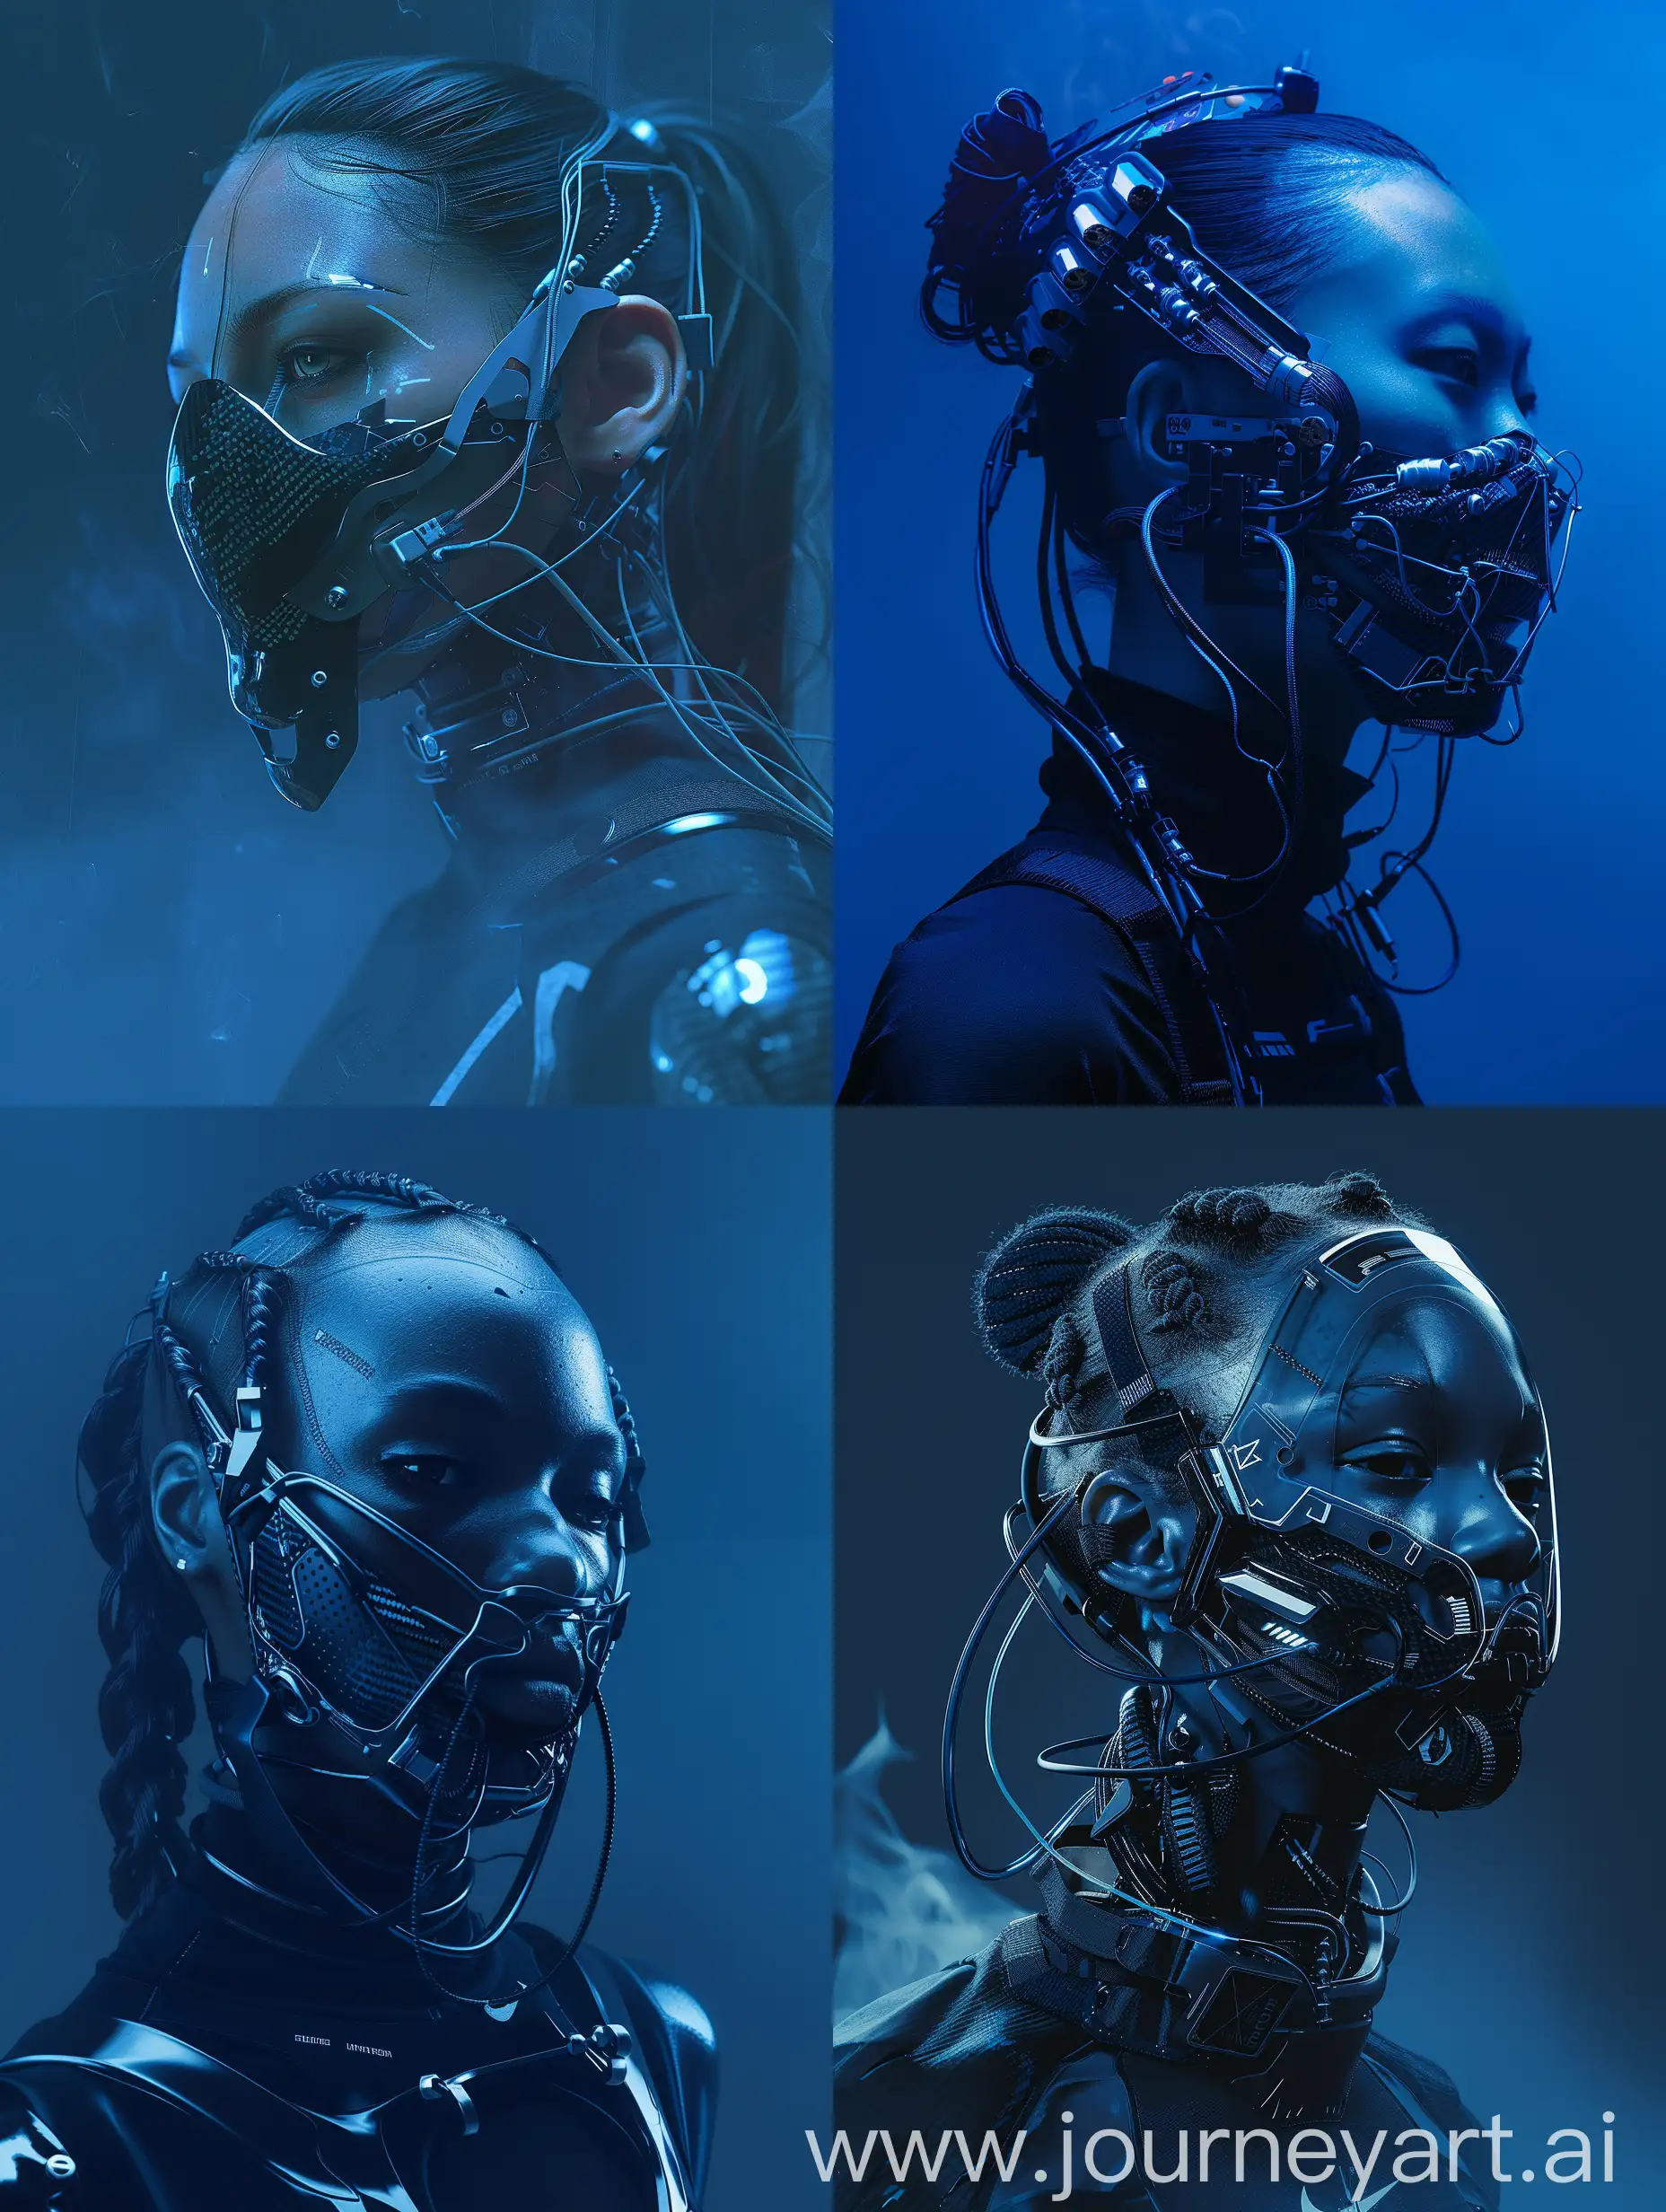 Against a sleek Dark Blue backdrop, witness the captivating presence of a character adorned with a cybernetic mouth-covering mask. It seamlessly merges cutting-edge technology with intricate details, showcasing carbon fiber textures, sleek aluminum accents, and wires. Symbolizing the delicate equilibrium between humanity and machine, her appearance embodies the essence of a futuristic cyberpunk aesthetic, further accentuated by Nike-inspired add-ons. With dynamic movements reminiscent of action-packed film sequences, accompanied by cinematic haze and an electric energy, she exudes an irresistible allure that commands attention.